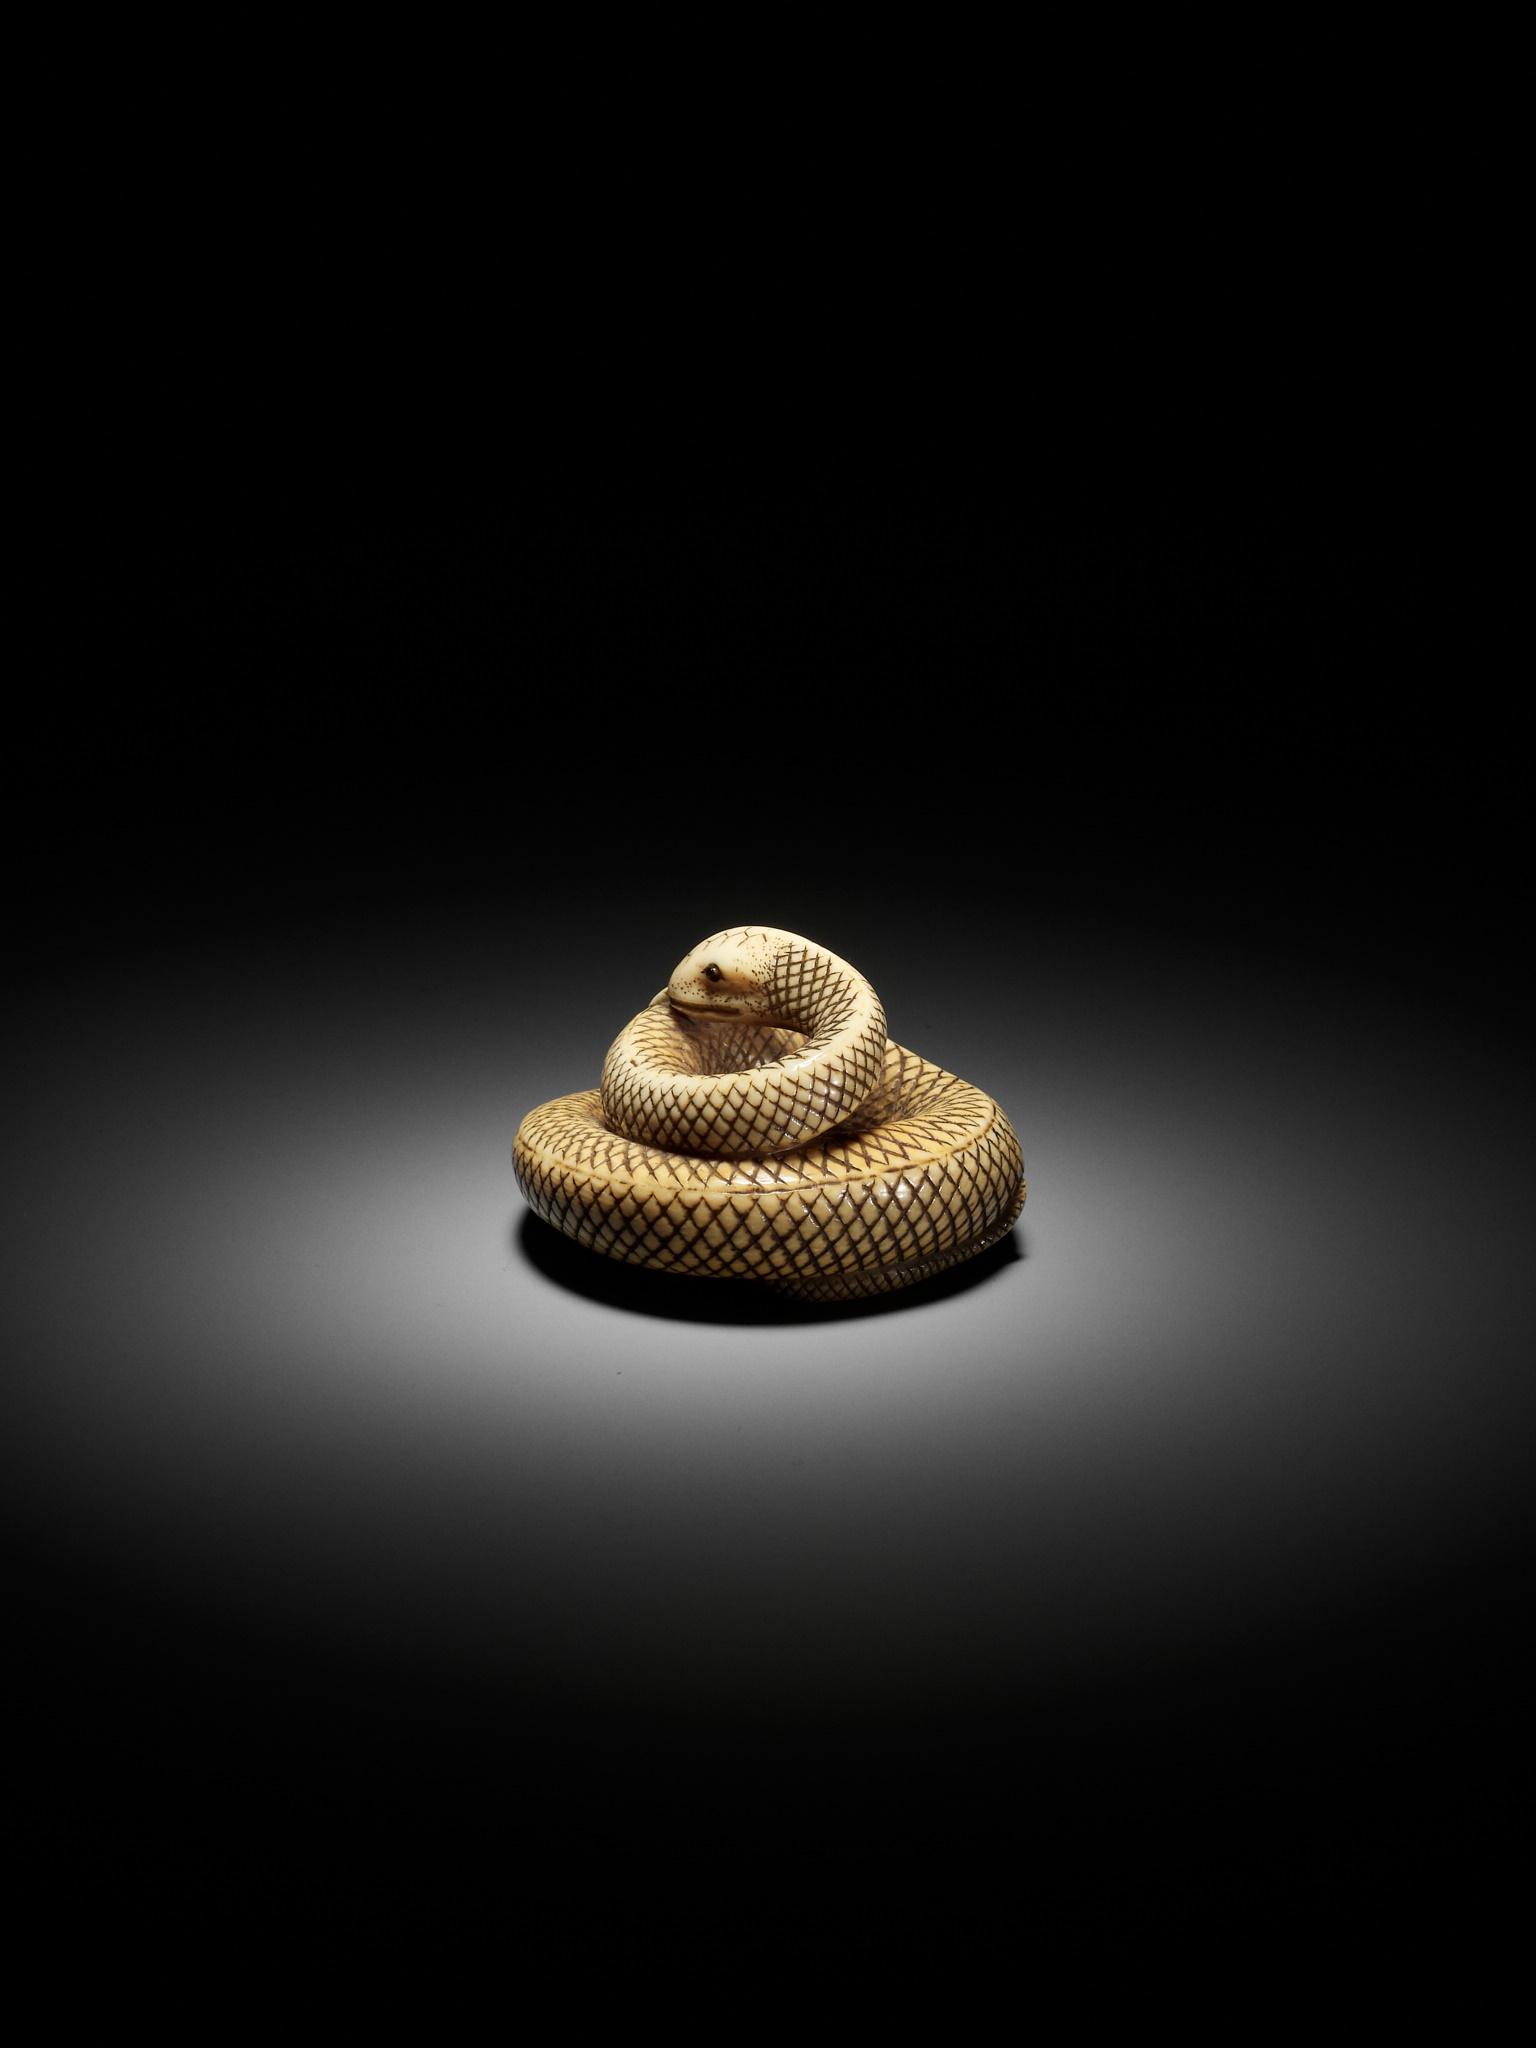 AN IVORY NETSUKE OF A COILED SNAKE, ATTRIBUTED TO OKATOMO - Image 6 of 16